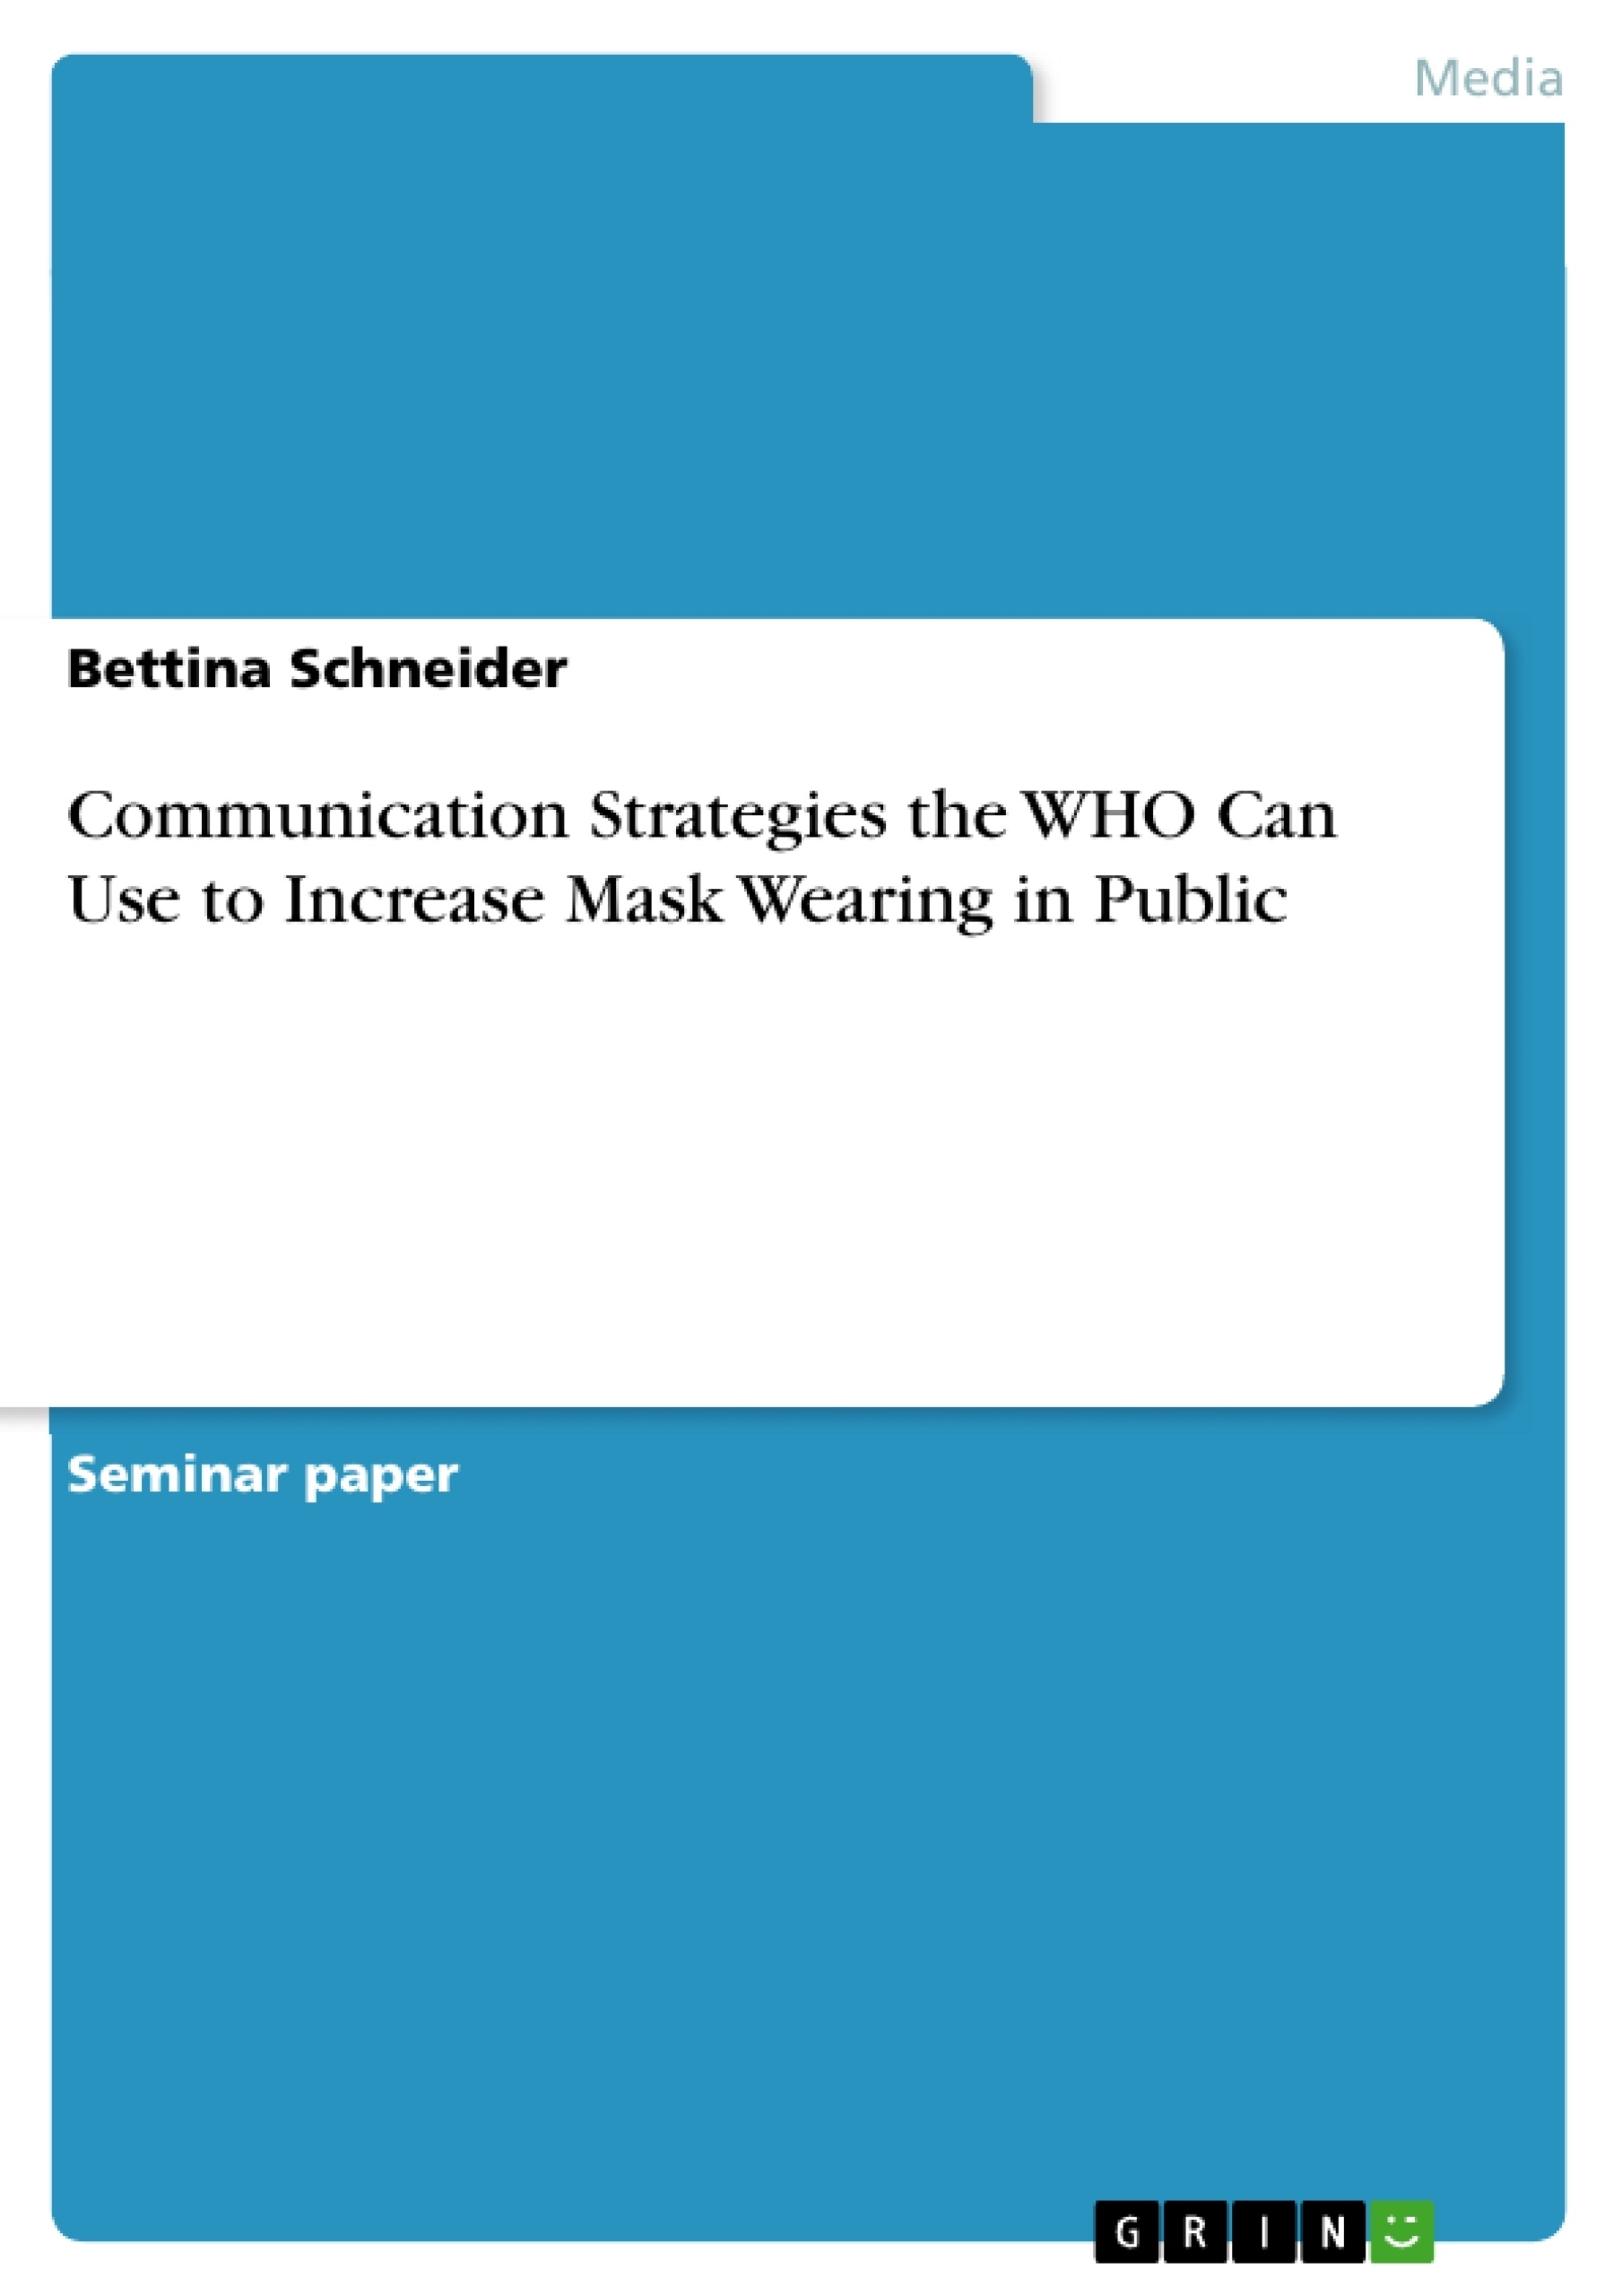 Title: Communication Strategies the WHO Can Use to Increase Mask Wearing in Public